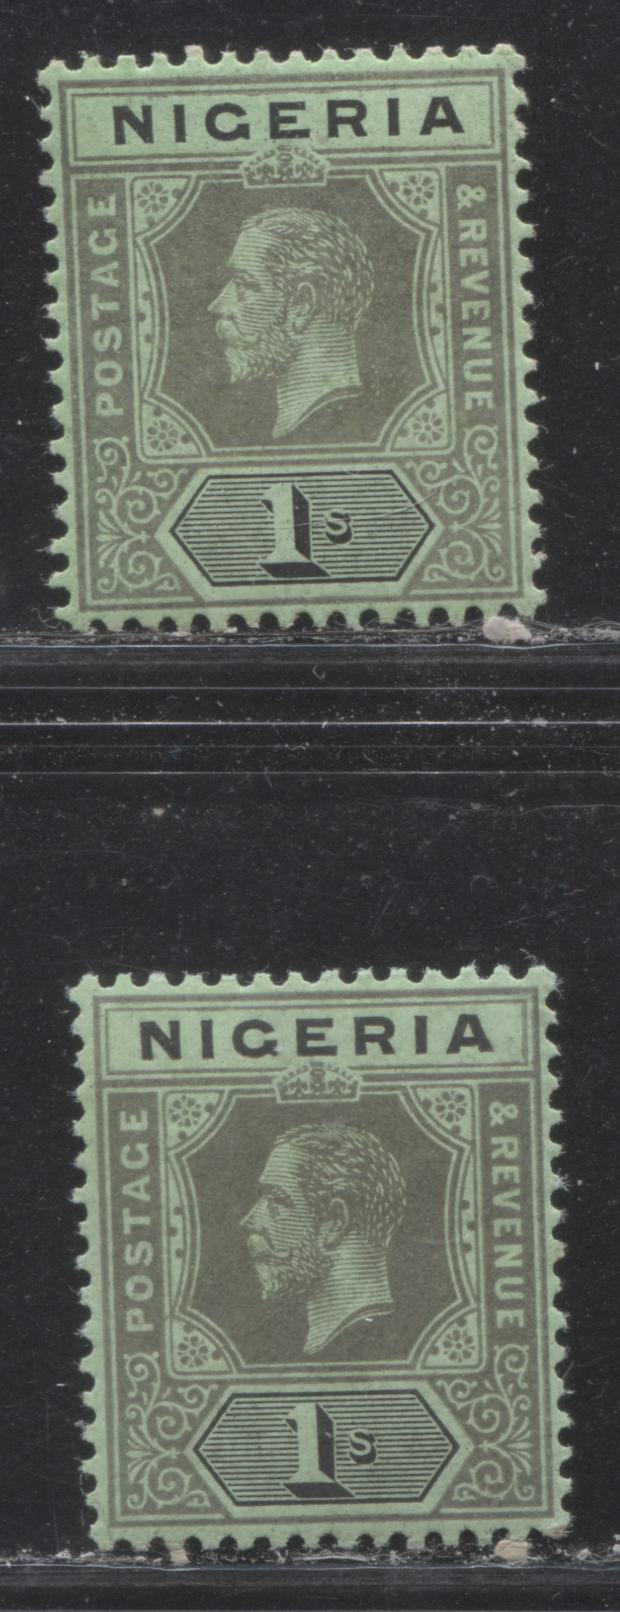 Lot 210 Nigeria SG# 8e, 8f 1/- Grey & Black on Emerald Paper With Emerald & Pale Olive Backs King George V, 1914-1921 Multiple Crown CA Imperium Keyplate Issue, Two VFNH Examples